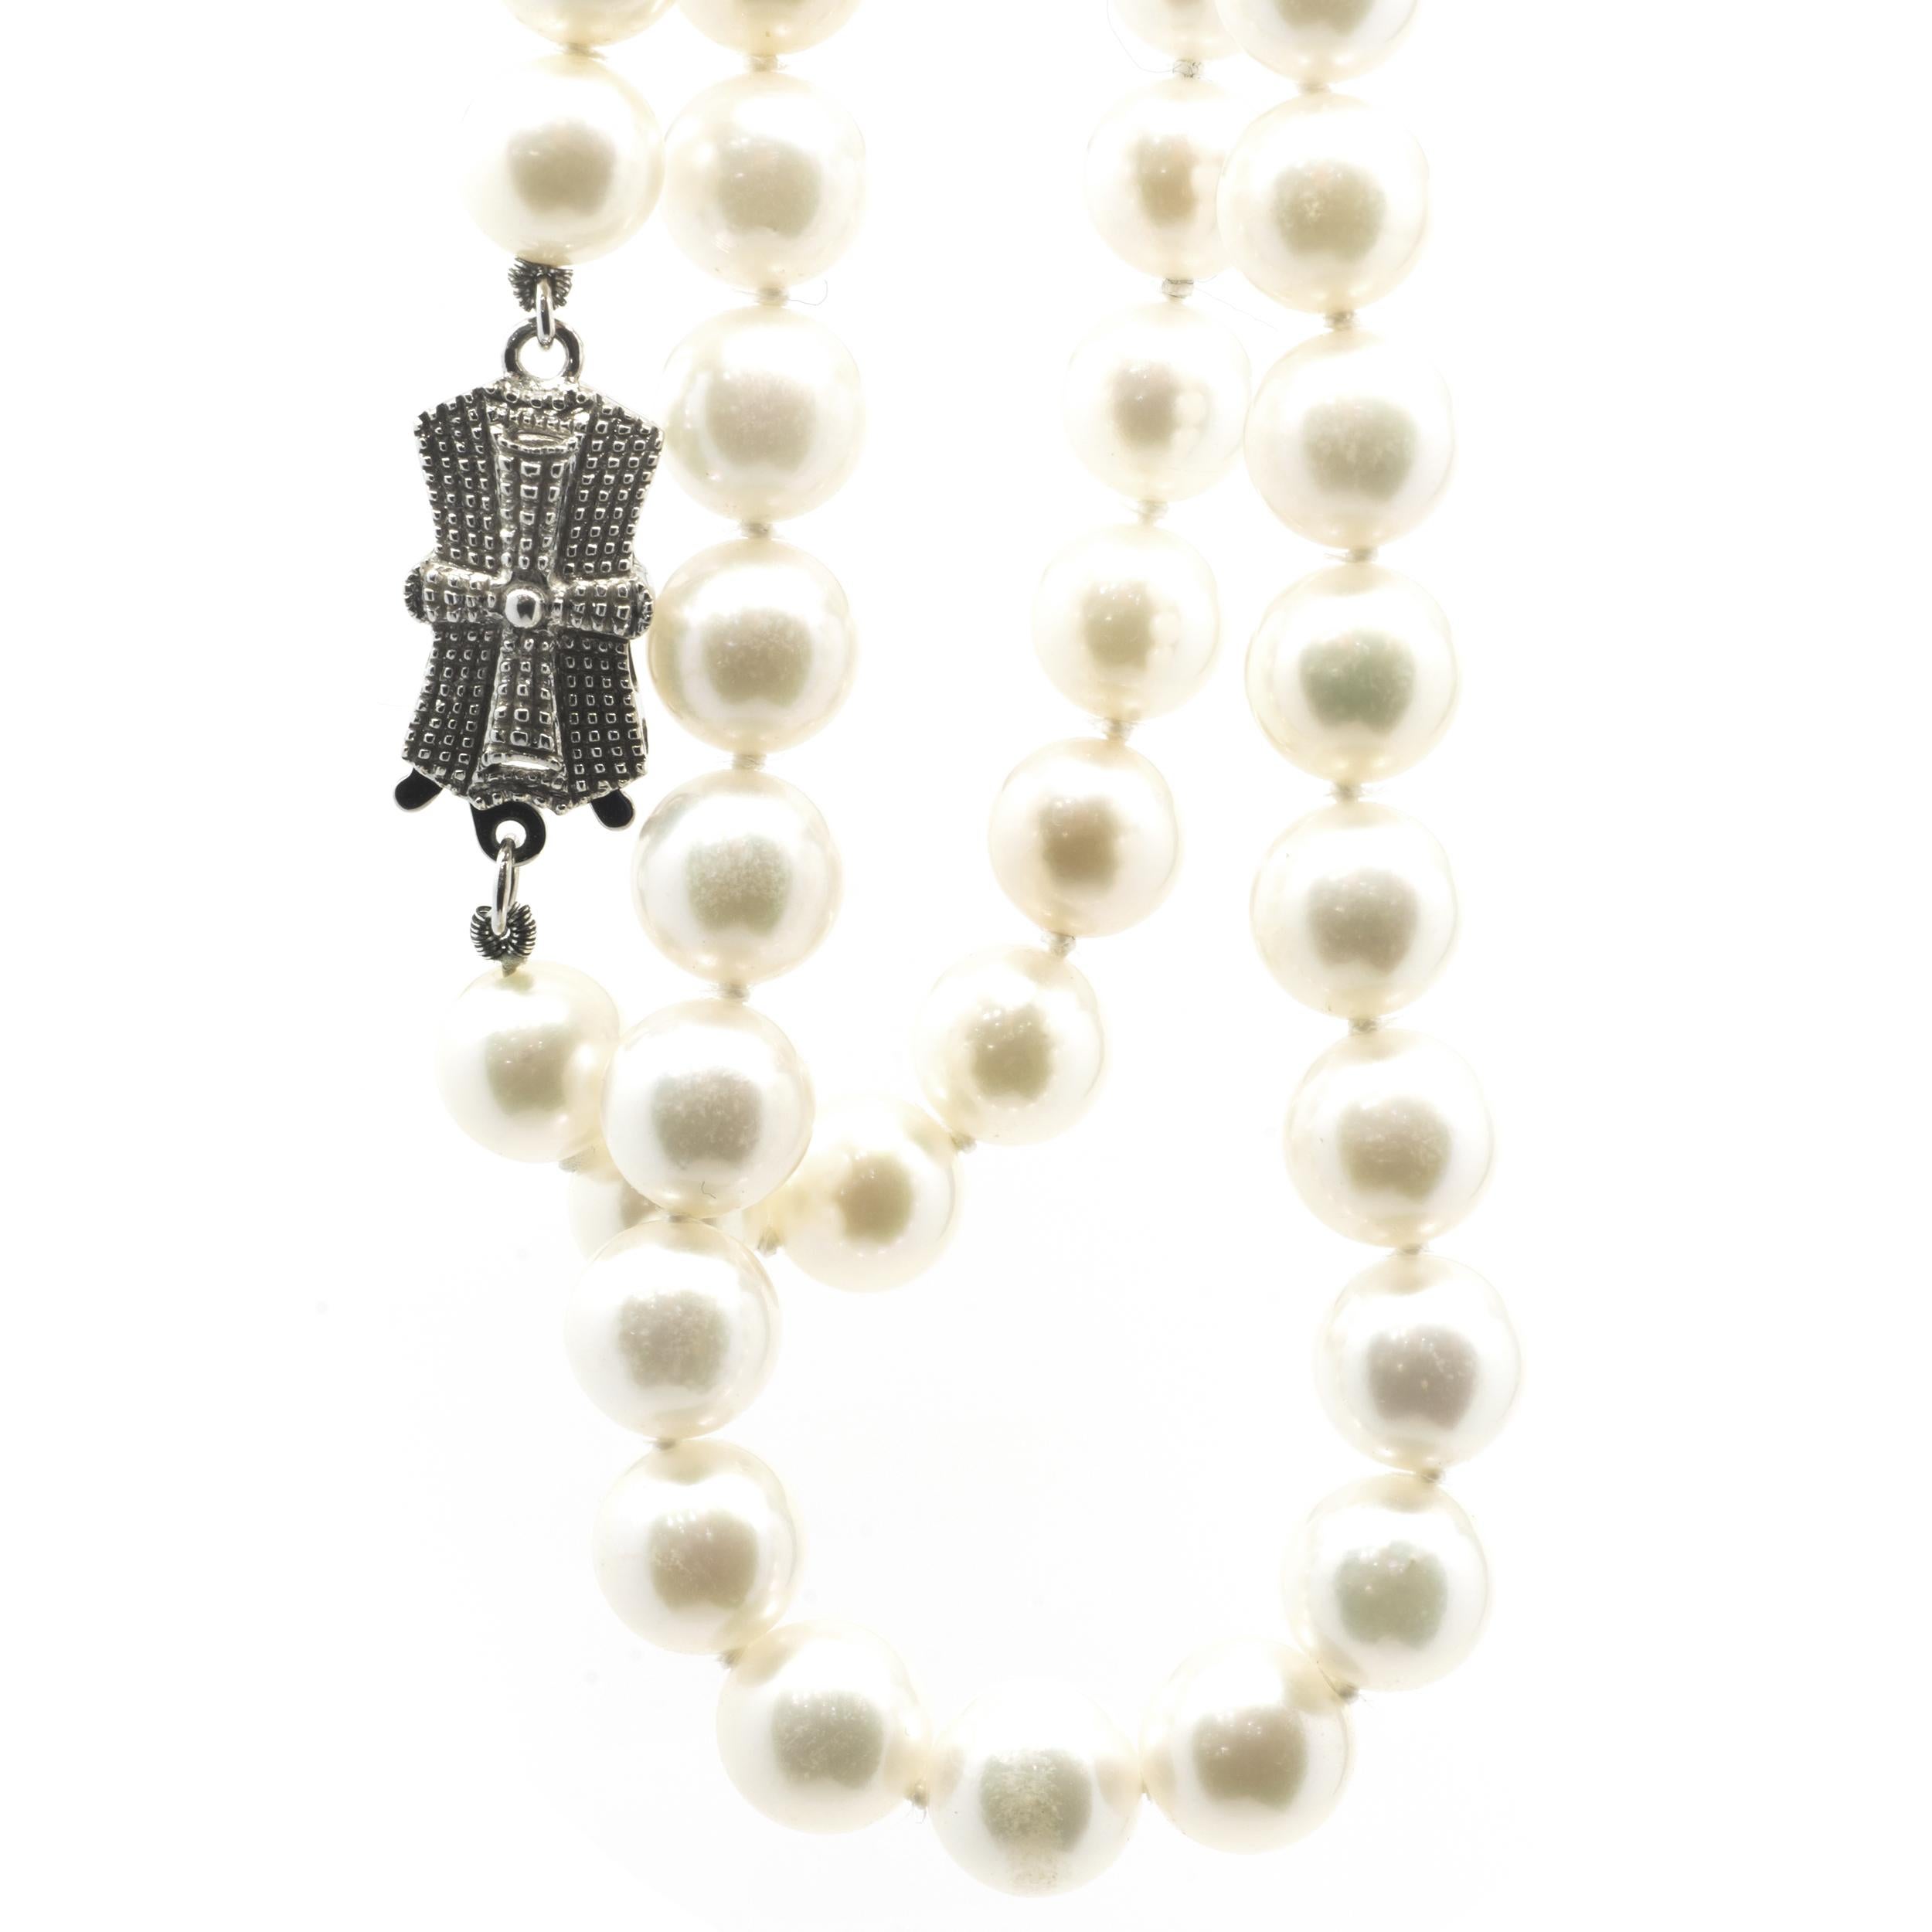 Designer: Custom
Material: 14K white gold
Pearl: cultured fresh water = 6.7mm
Dimensions: necklace measures 18-inches in length
Weight: 28.56 grams
